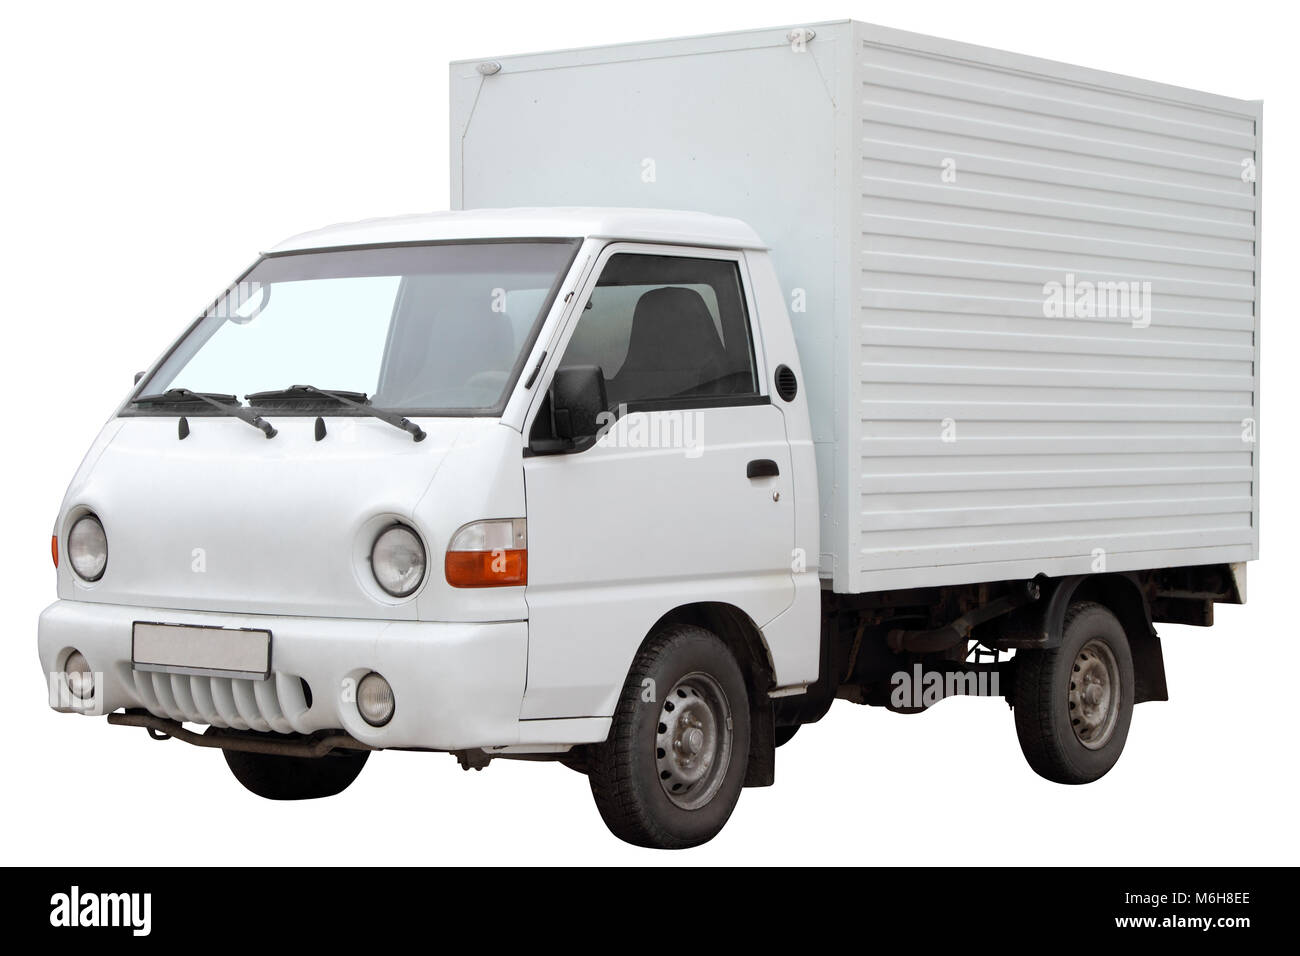 Compact van, isolated on white background. Stock Photo